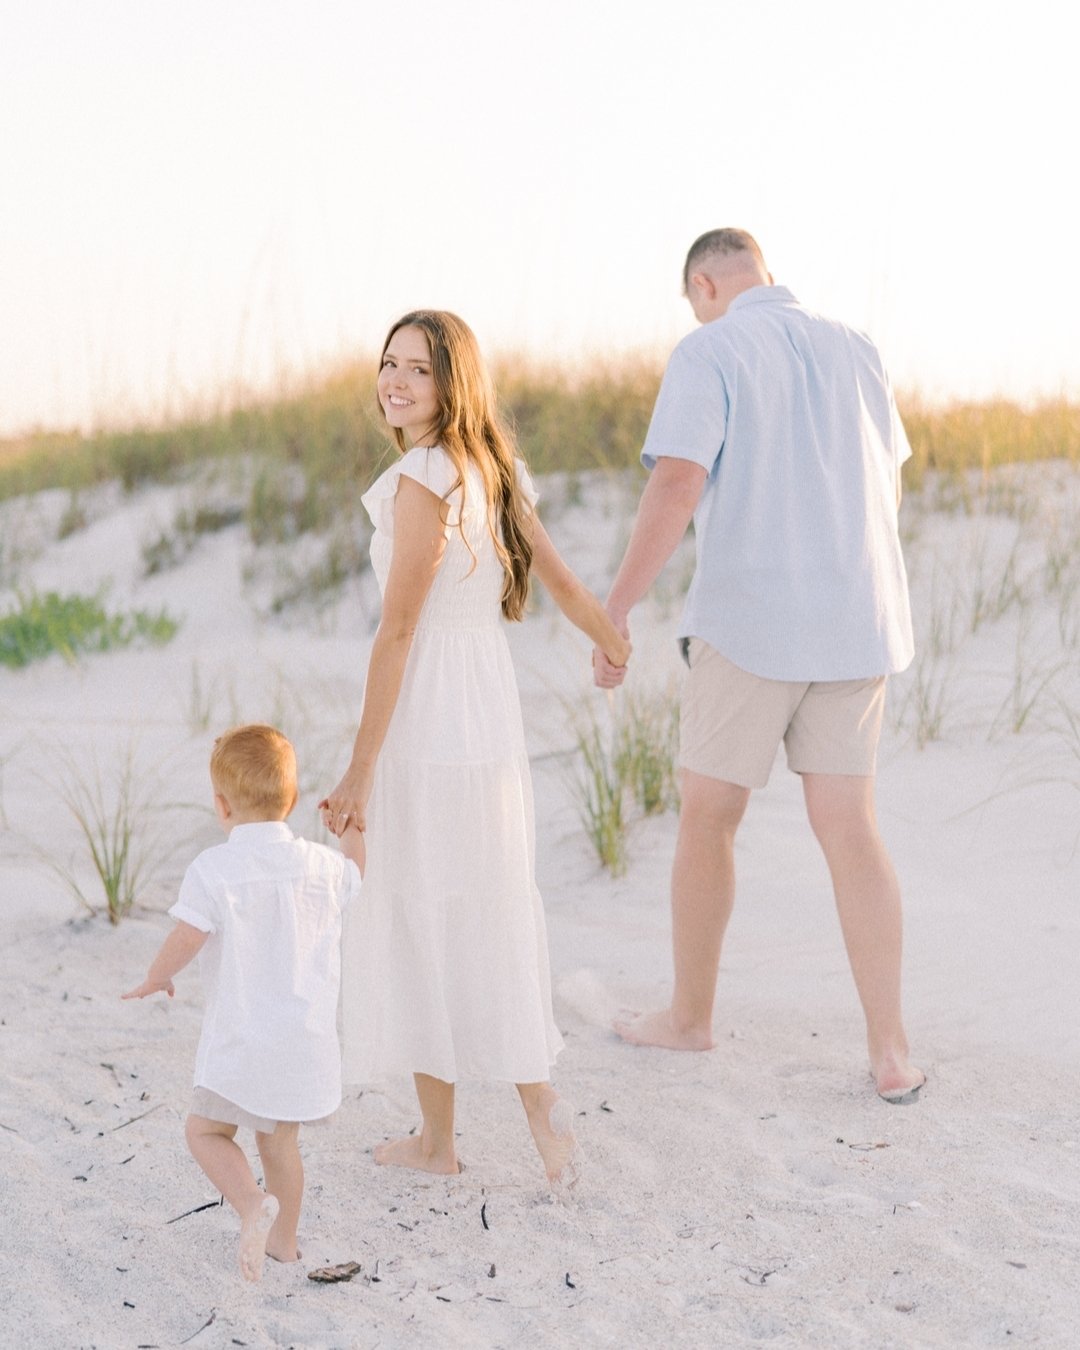 Last week I woke up early to photograph this beautiful family! Sunrise sessions, whether on the beach or not may be my new favorite. The light was so dreamy! 
.
St. Pete Beach Florida Family Photo Session
. 
#tampafamilyphotographer #tampaphotographe